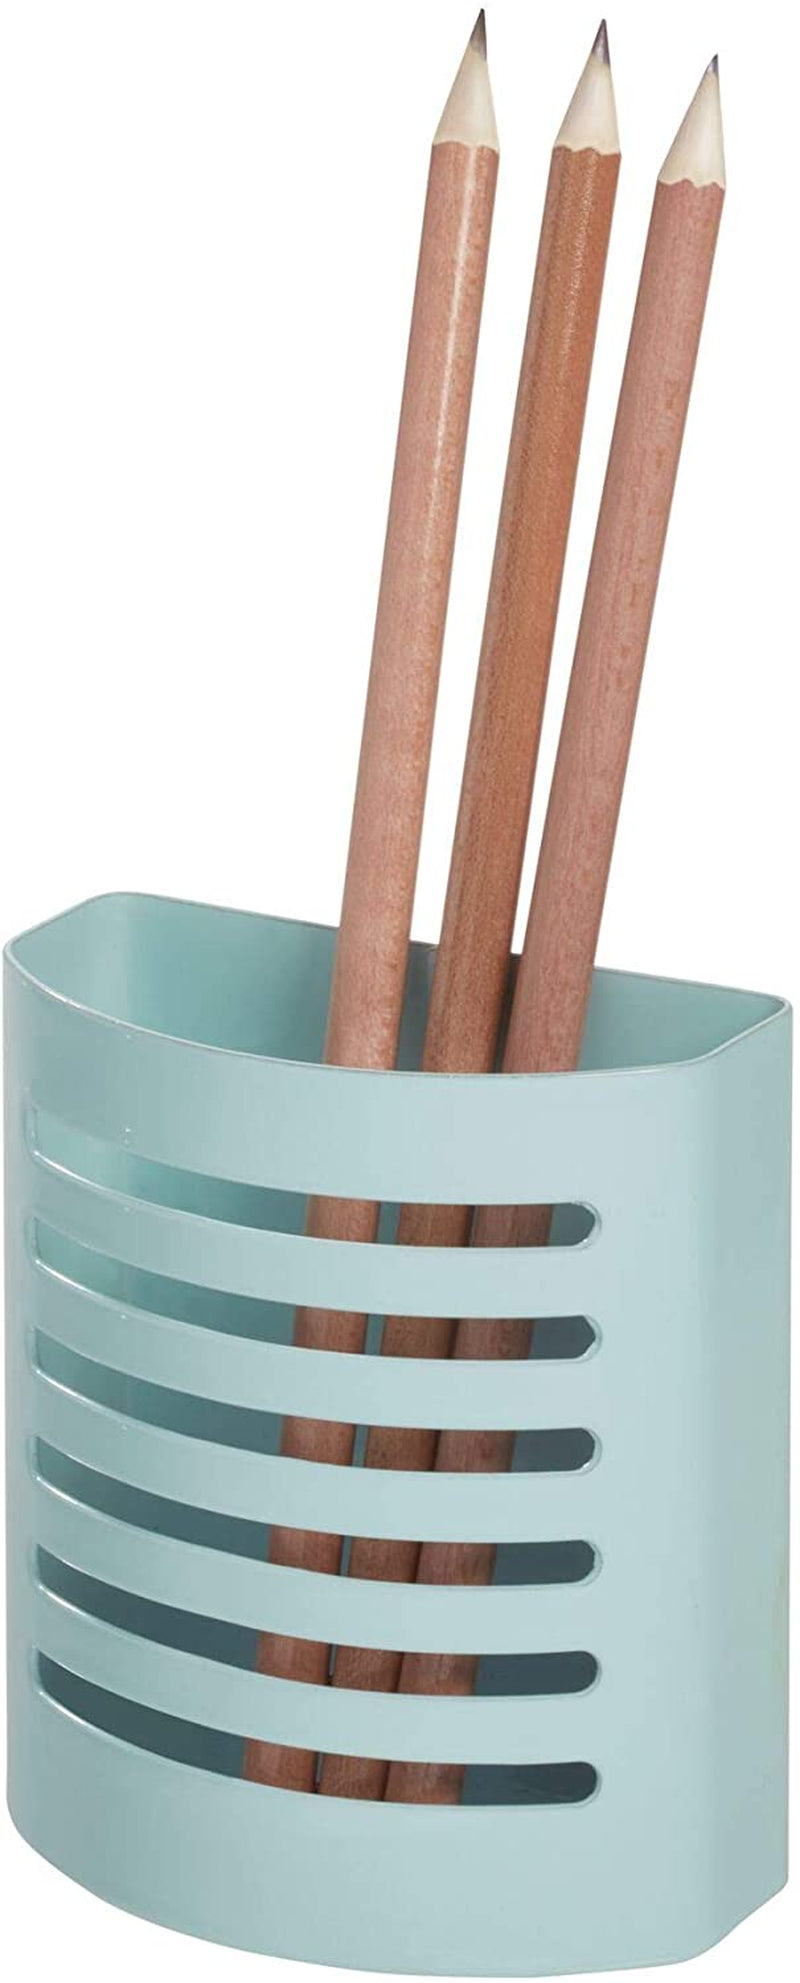 Idesign 85176 Magnetic Modern Pen and Pencil Holder, Writing Utensil Storage Organizer for Kitchen, Locker, Home, or Office, Set of 1, Mint Blue Home & Garden > Household Supplies > Storage & Organization iDesign Mint Blue Pencil Cup 